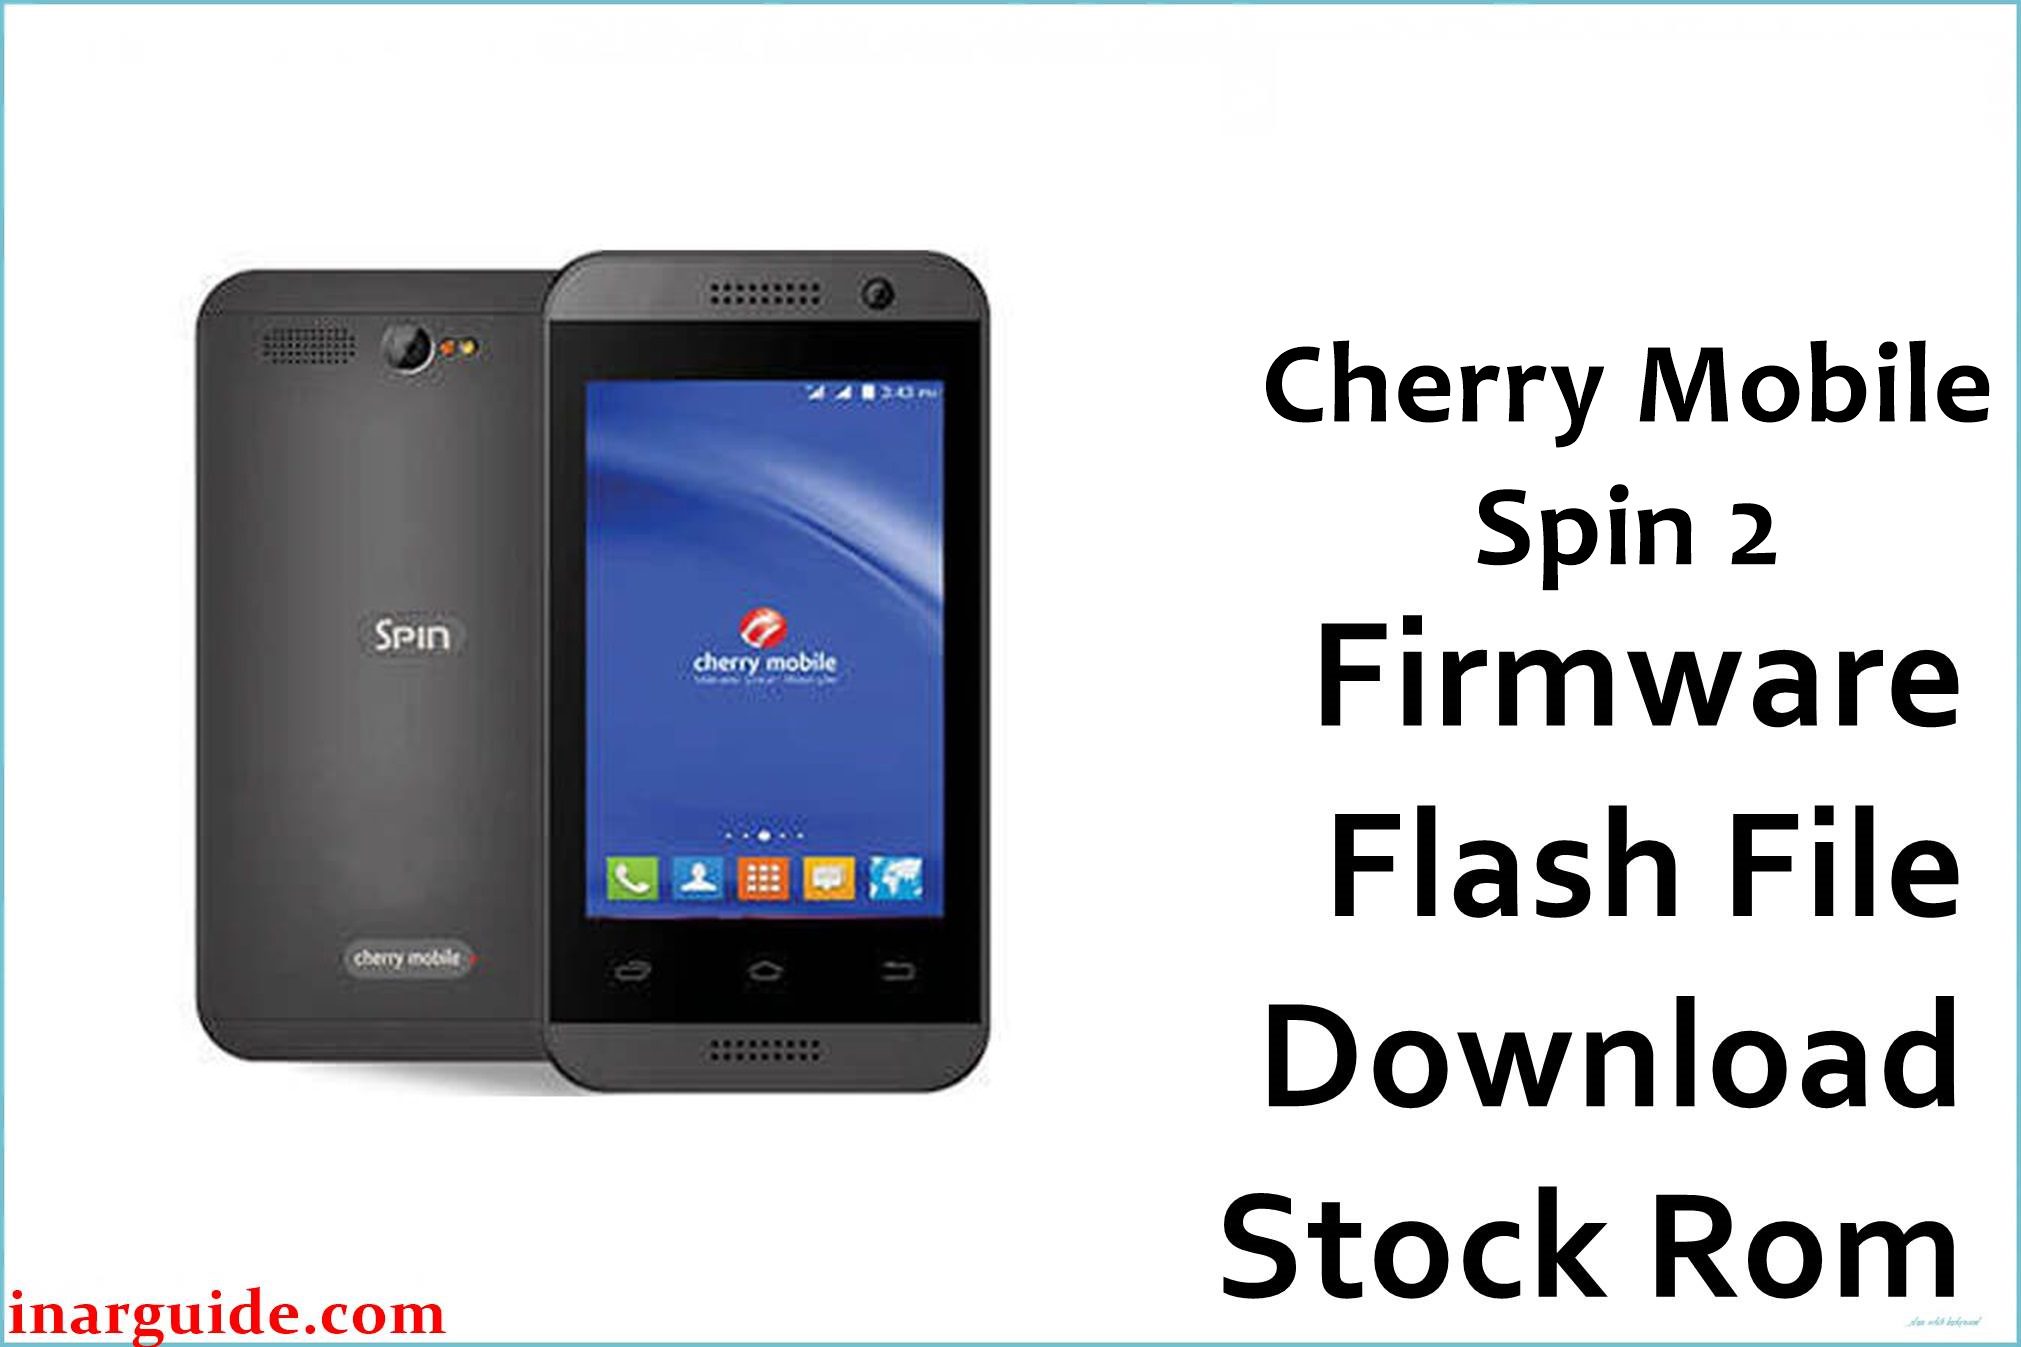 Cherry Mobile Spin 2